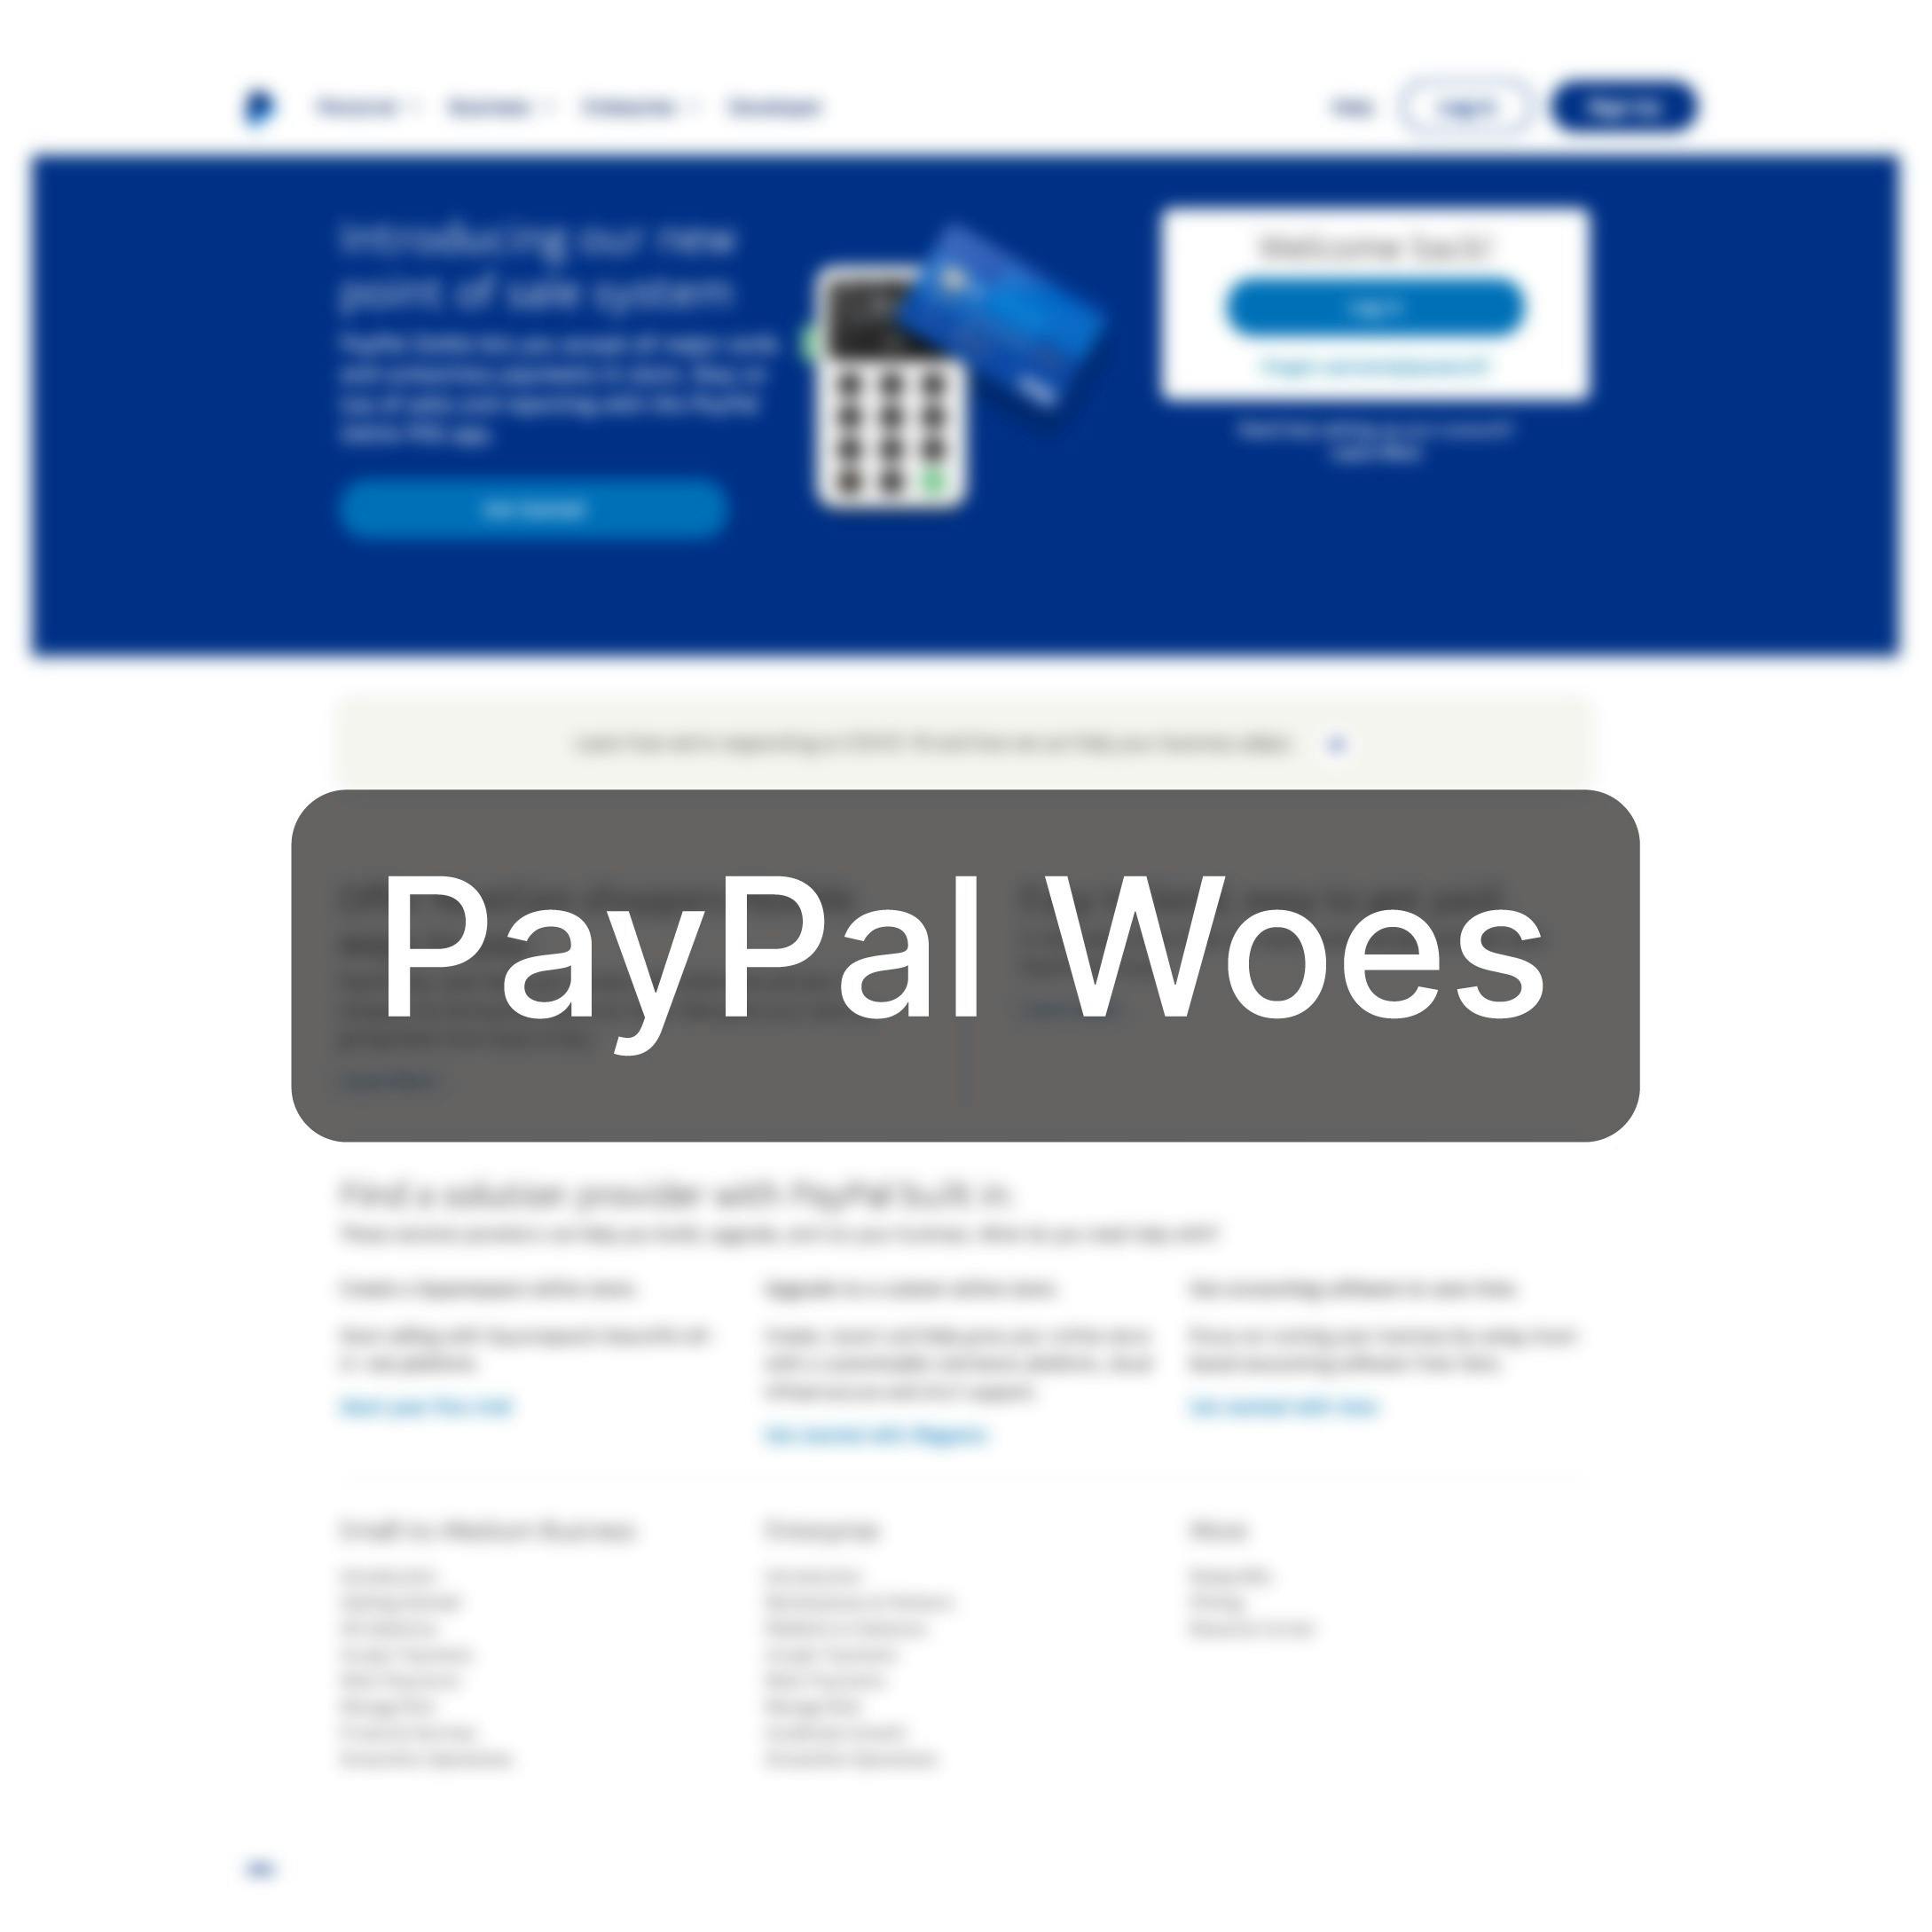 What happened to PayPal?